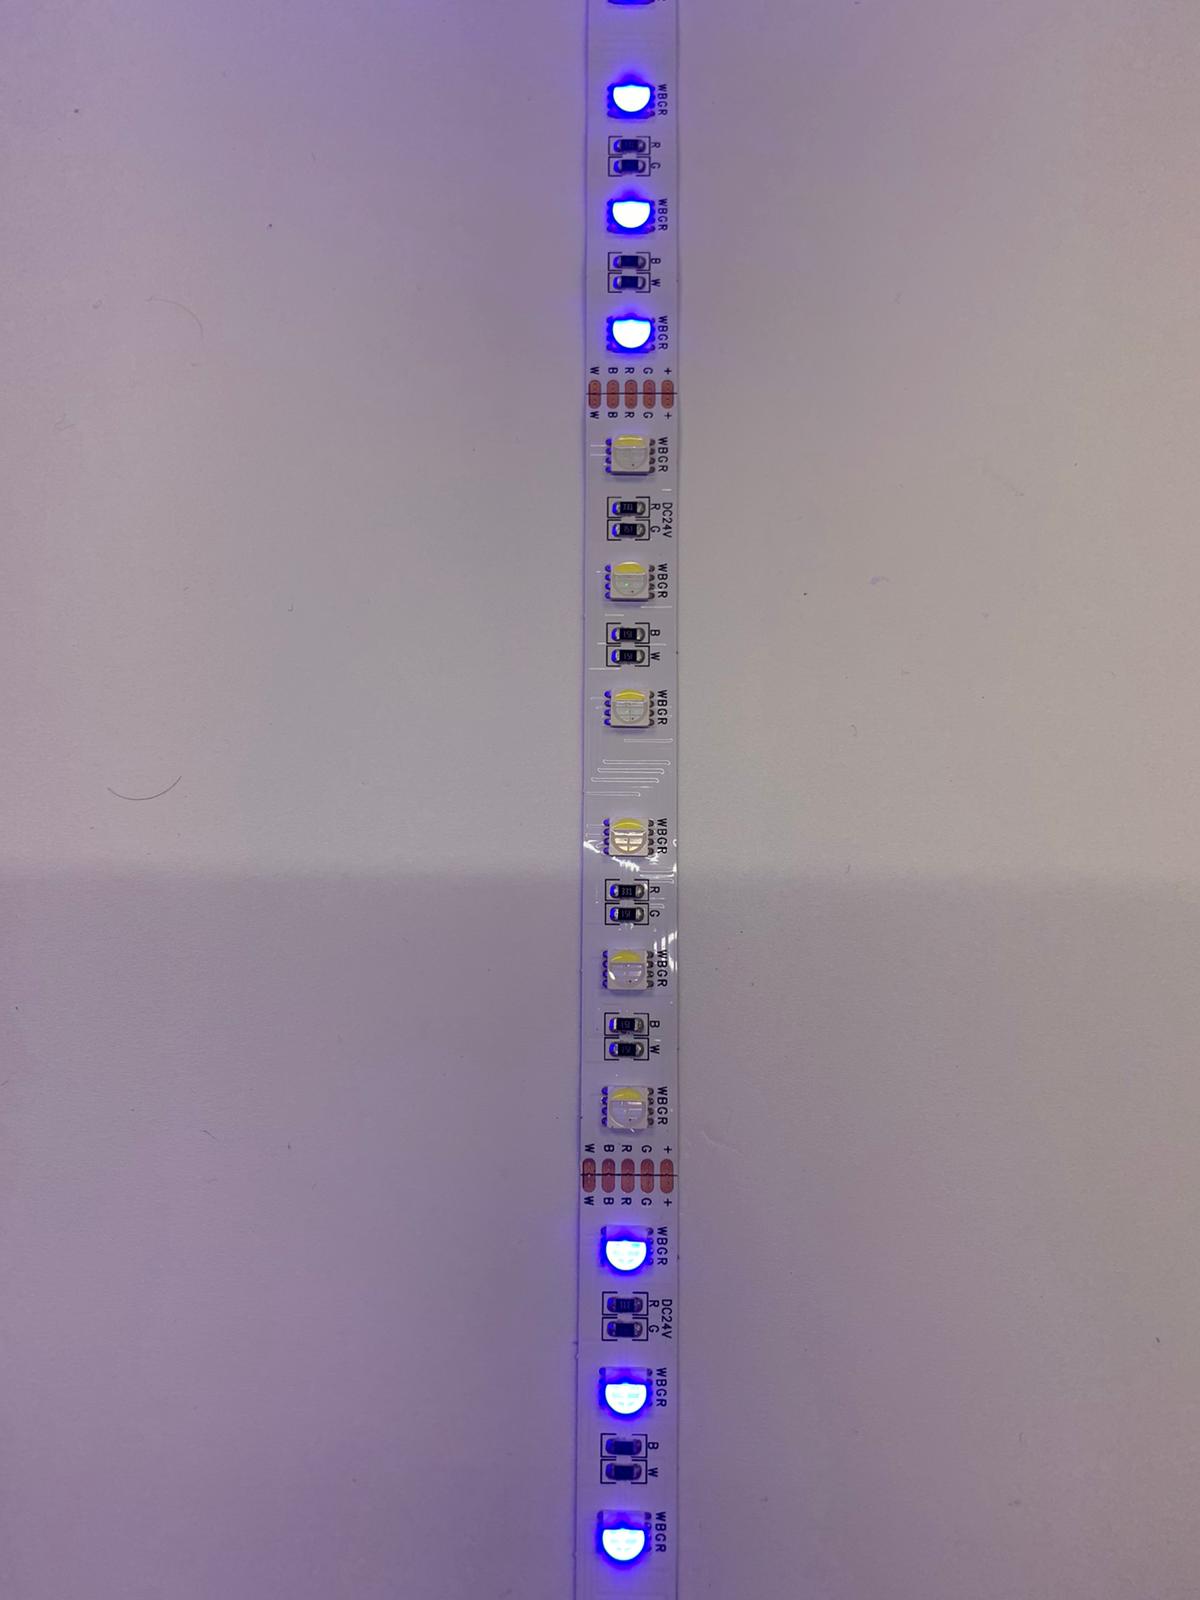 How To Fix Glow Led Light Strip If Most Of It Stays Green? 